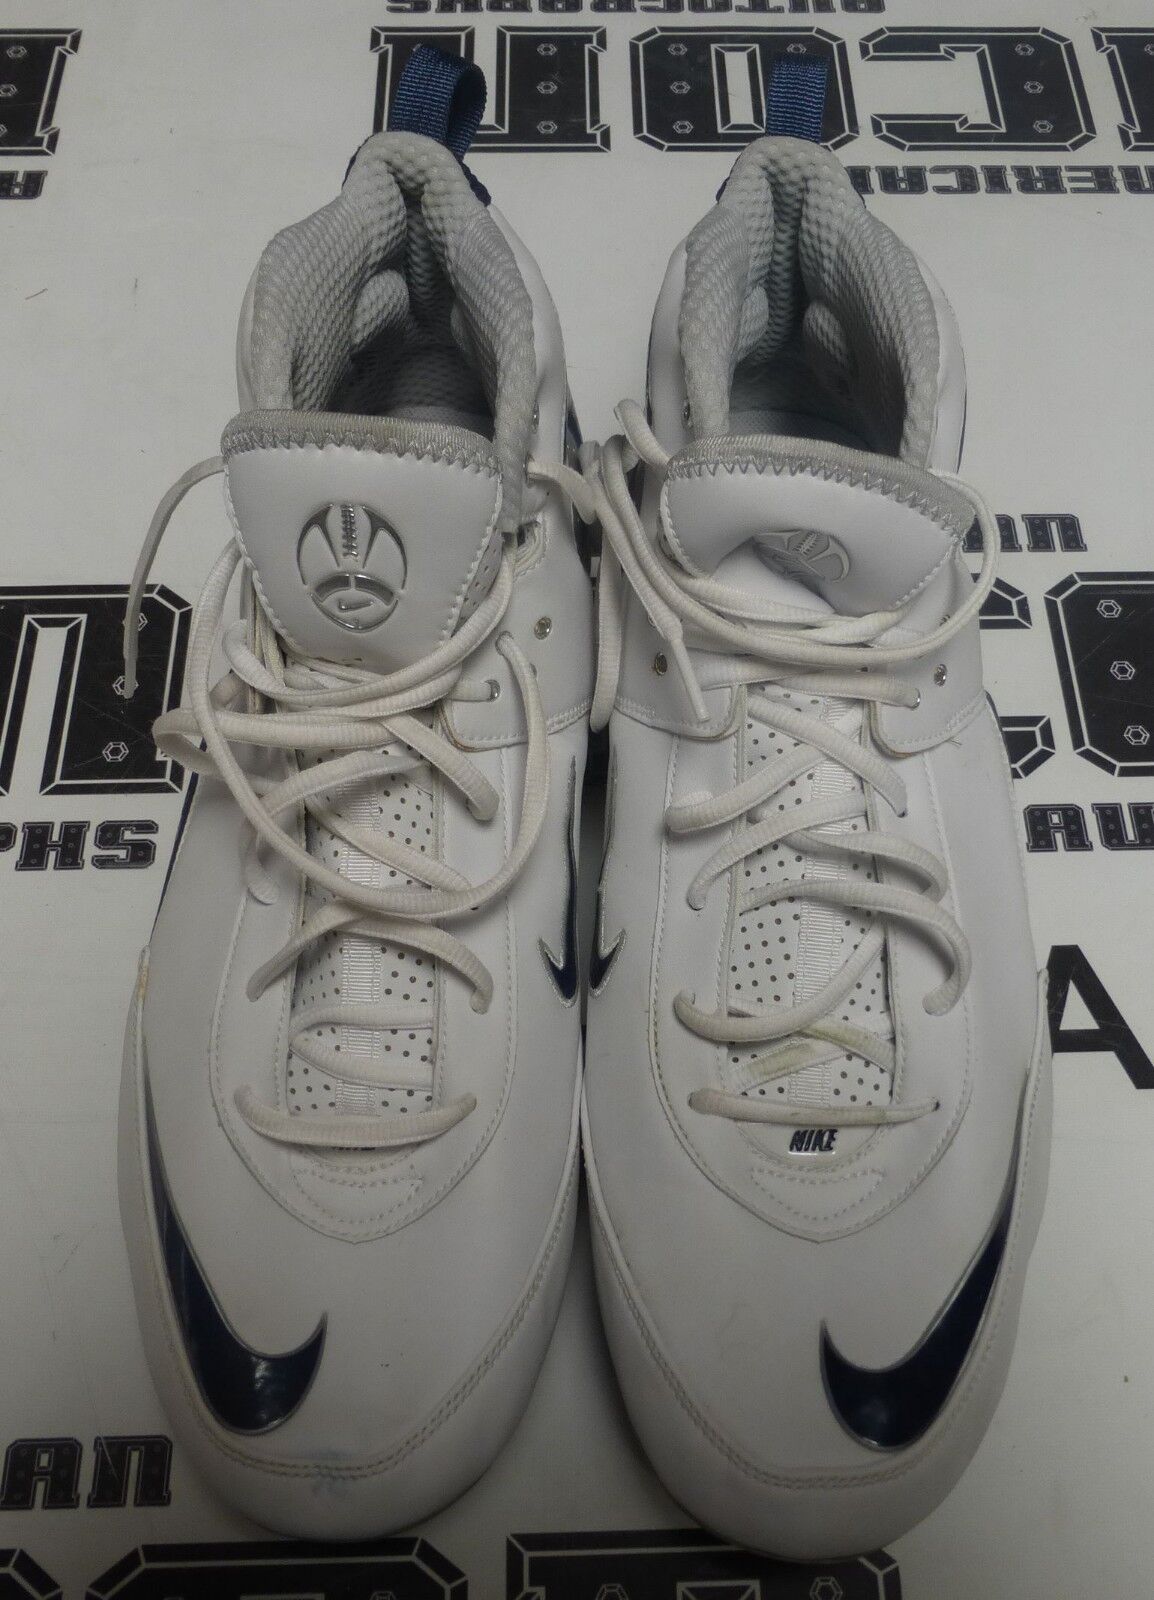 Dennis Max 51% OFF Norman Game Used Worn Football 2009 Size Cleats Shipping included C Nike 16